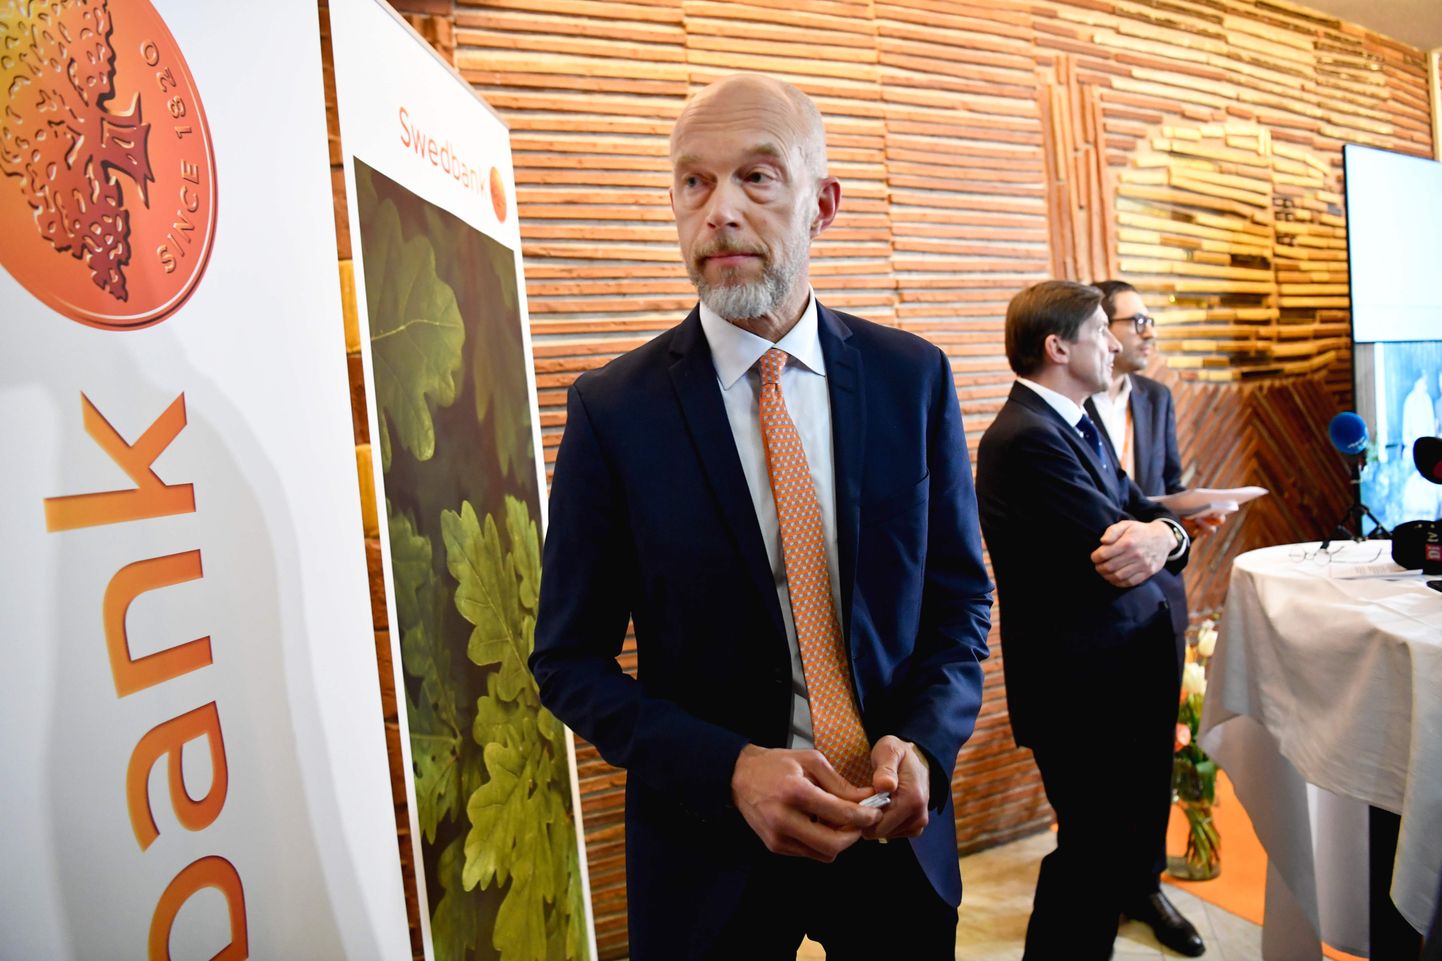 Swedbank's acting CEO Anders Karlsson attends a press conference as part of Swedbank's Annual General Meeting on March 28, 2019 in Stokholm. - Swedbank, in the focus of investigators in connection with a larger money laundering scandal, has fired its CEO Birgitte Bonnesen on March 28, 2019. (Photo by Henrik MONTGOMERY / TT News Agency / AFP) / Sweden OUT